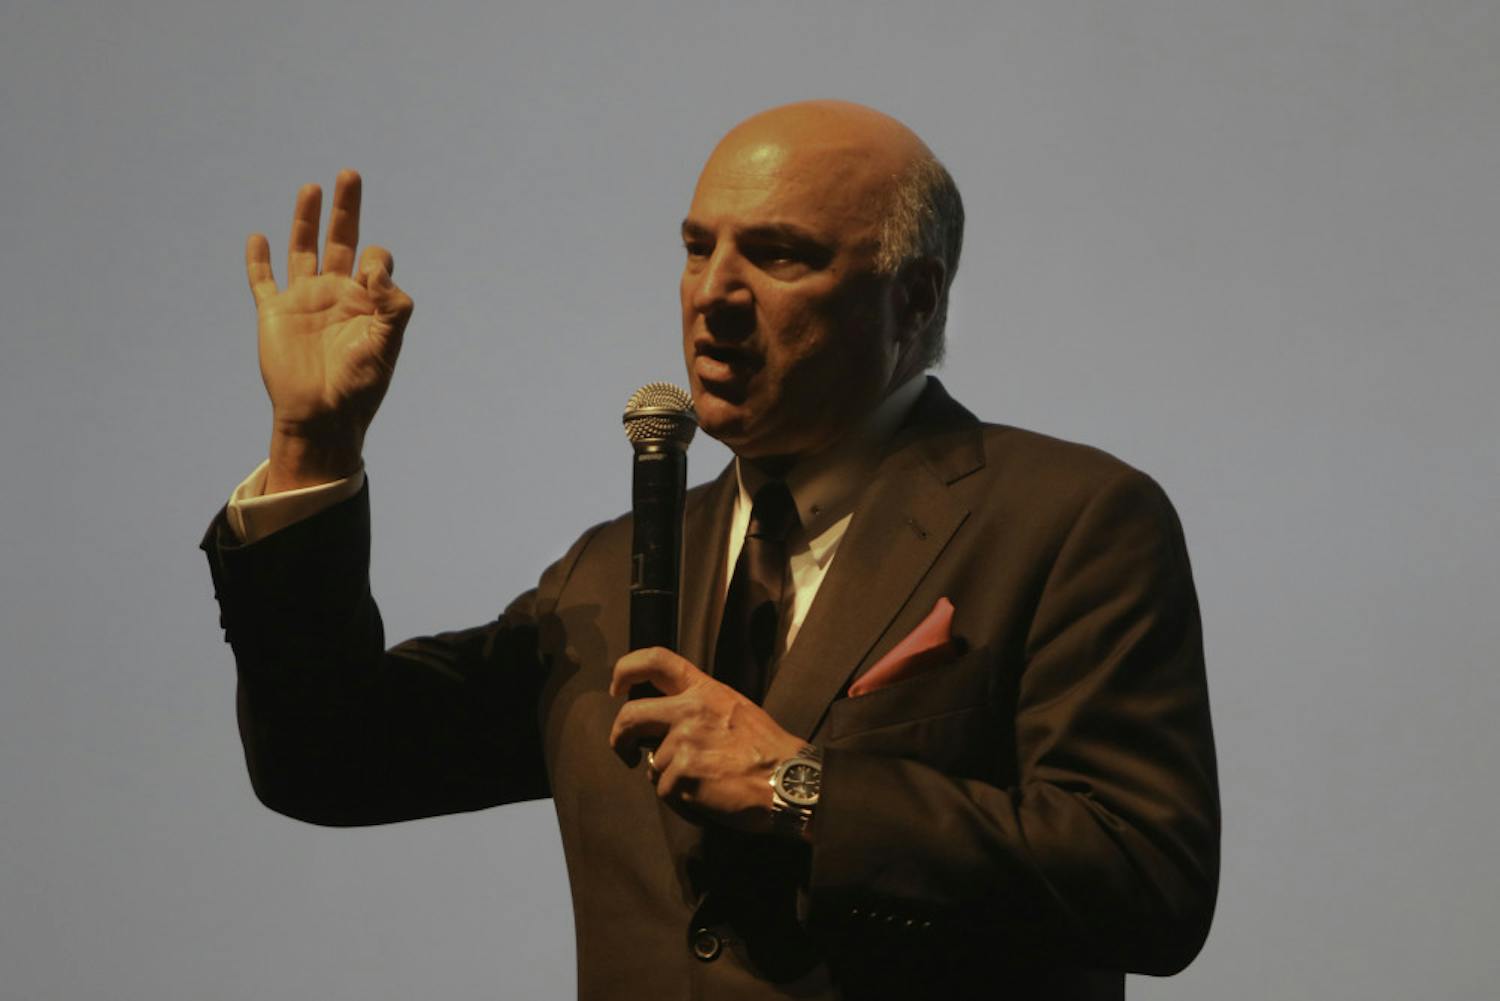 Kevin O’Leary, the 64-year-old businessman and star of the television show “Shark Tank,” speaks Monday to a packed auditorium at the Phillips Center for the Performing Arts at UF. O’Leary used clips from the television show during the presentation and took questions from the audience at the end.